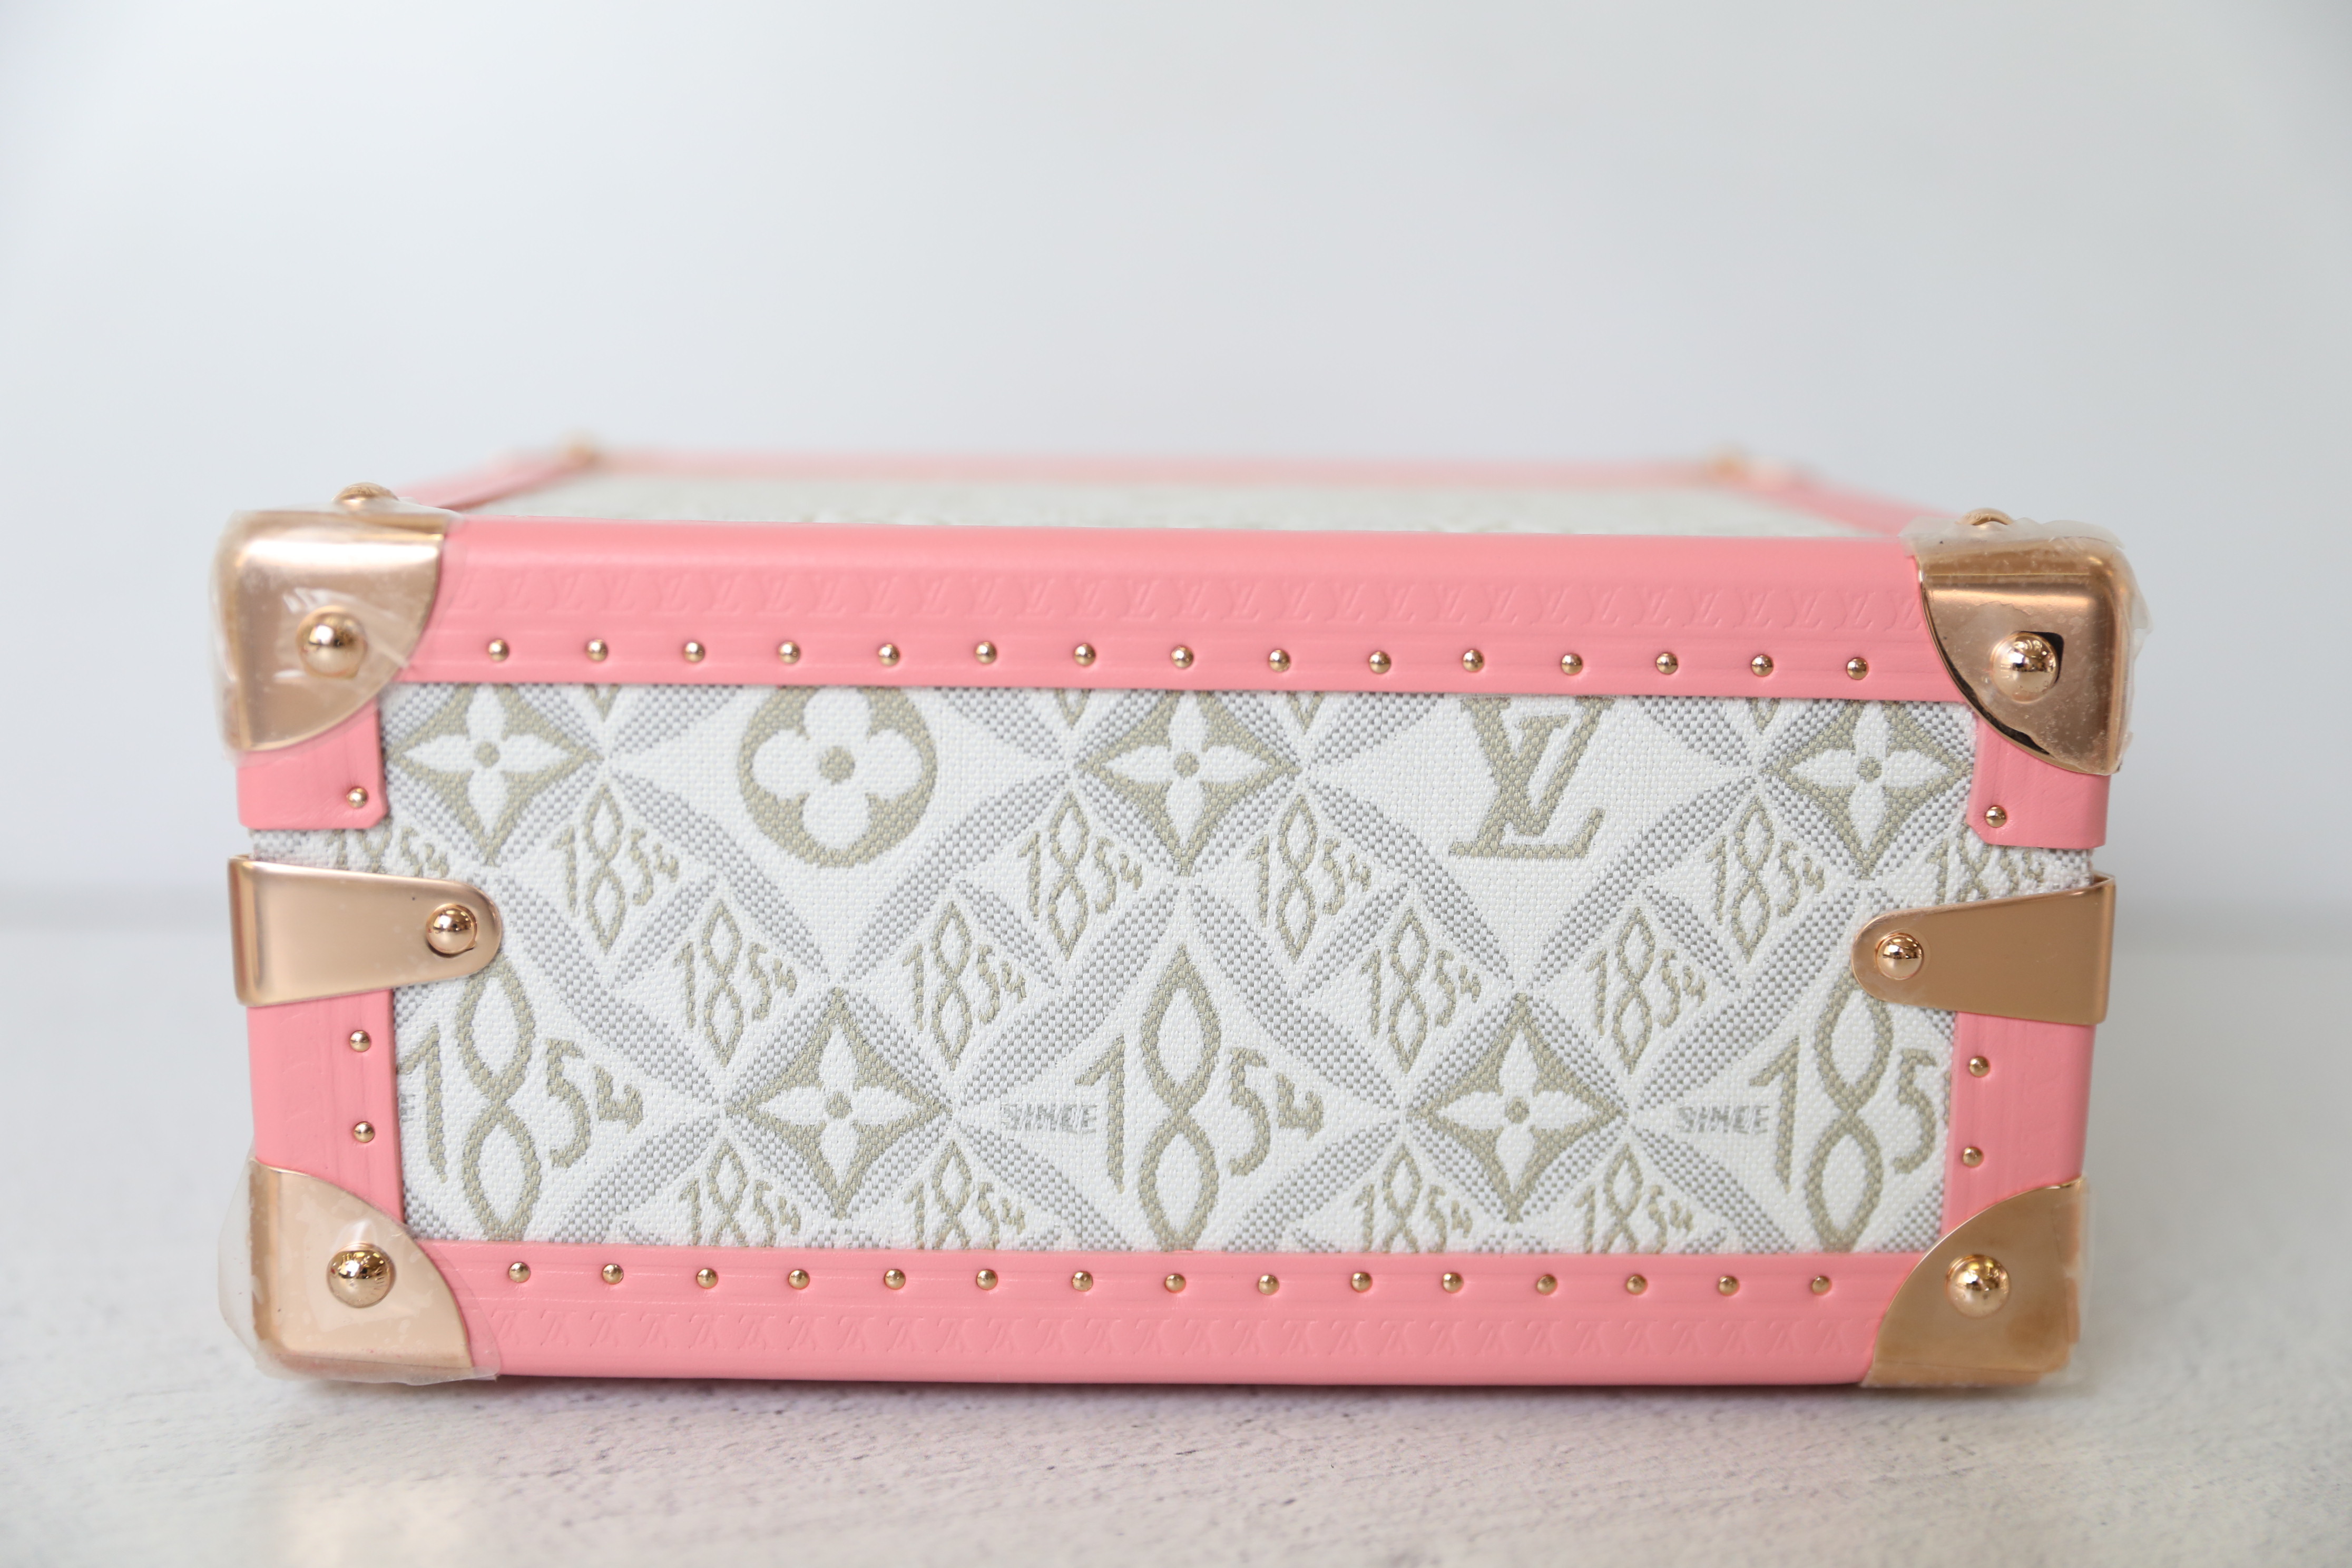 Louis Vuitton Since 1854 Trunk, Custom Pink and Grey, New in Box